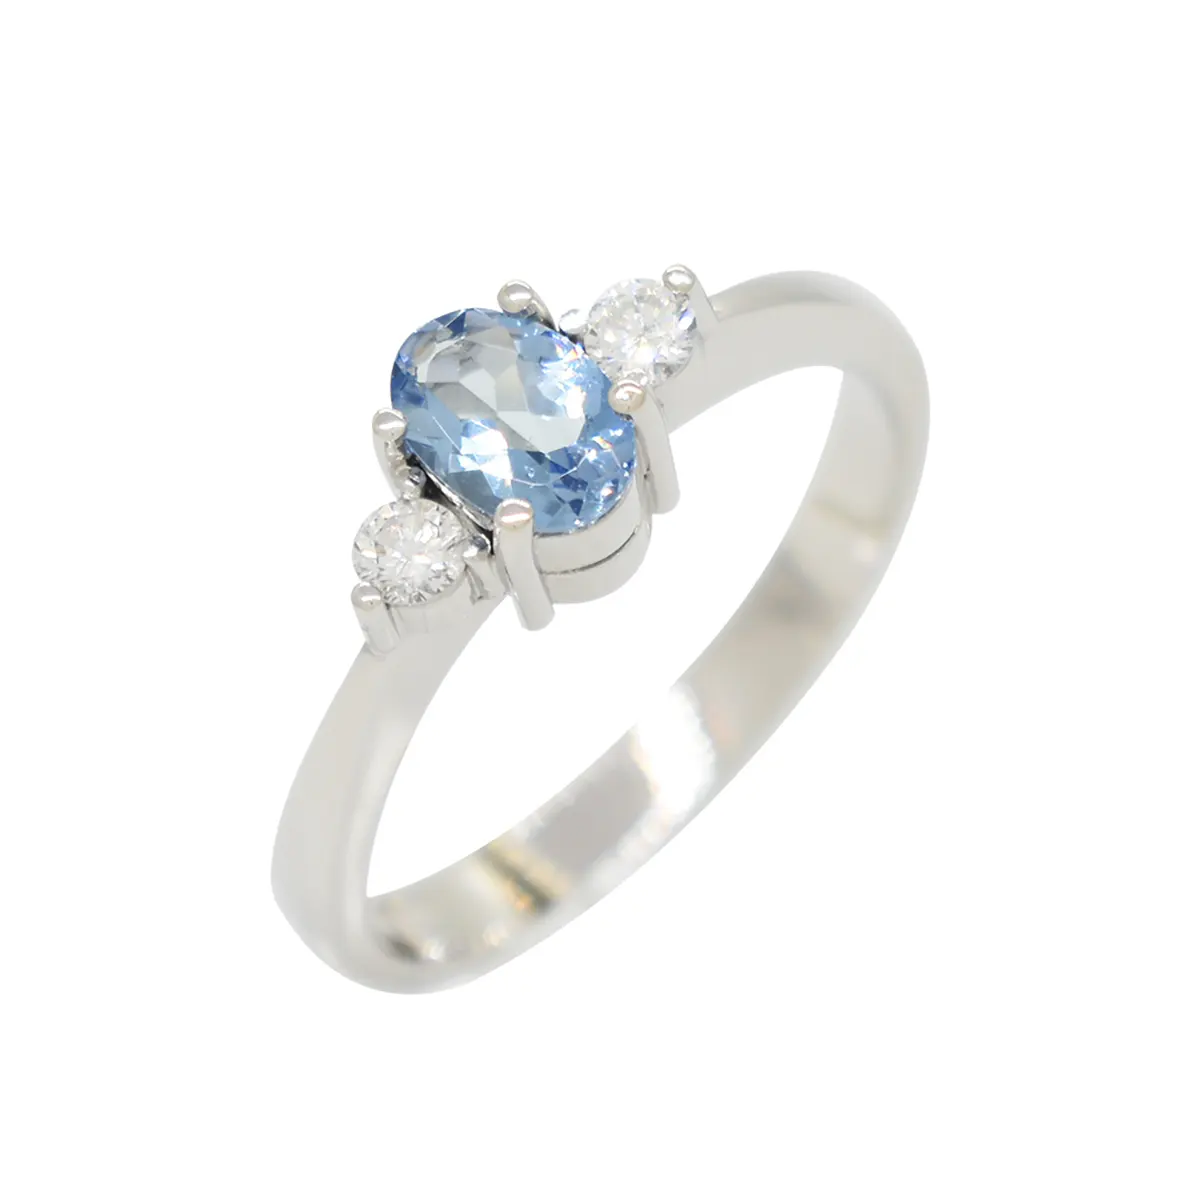 3-stones-ring-with-oval-shape-aquamarine-and-brilliant-cut-diamonds-in-white-gold